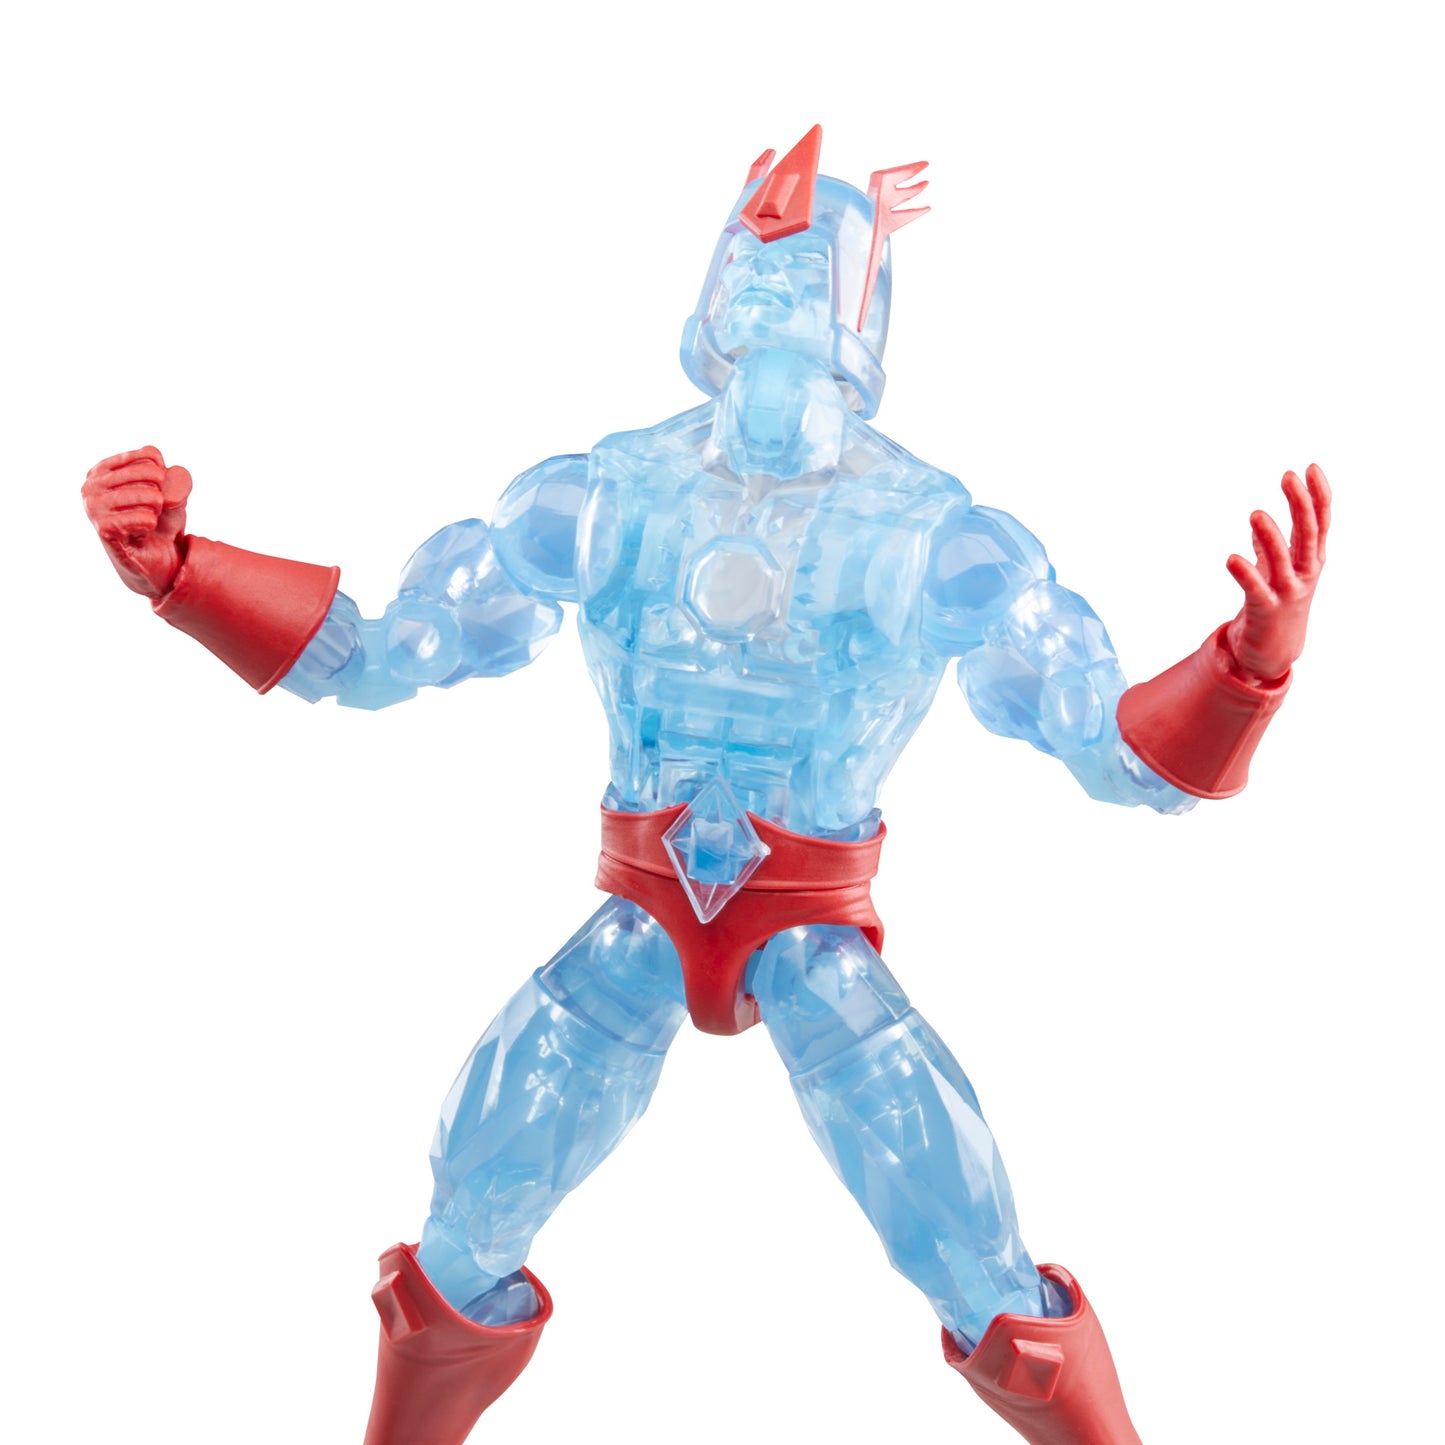 Marvel Legends Marvel's Crystar, 6 Collectible Action Figure HERETOSERVEYOU